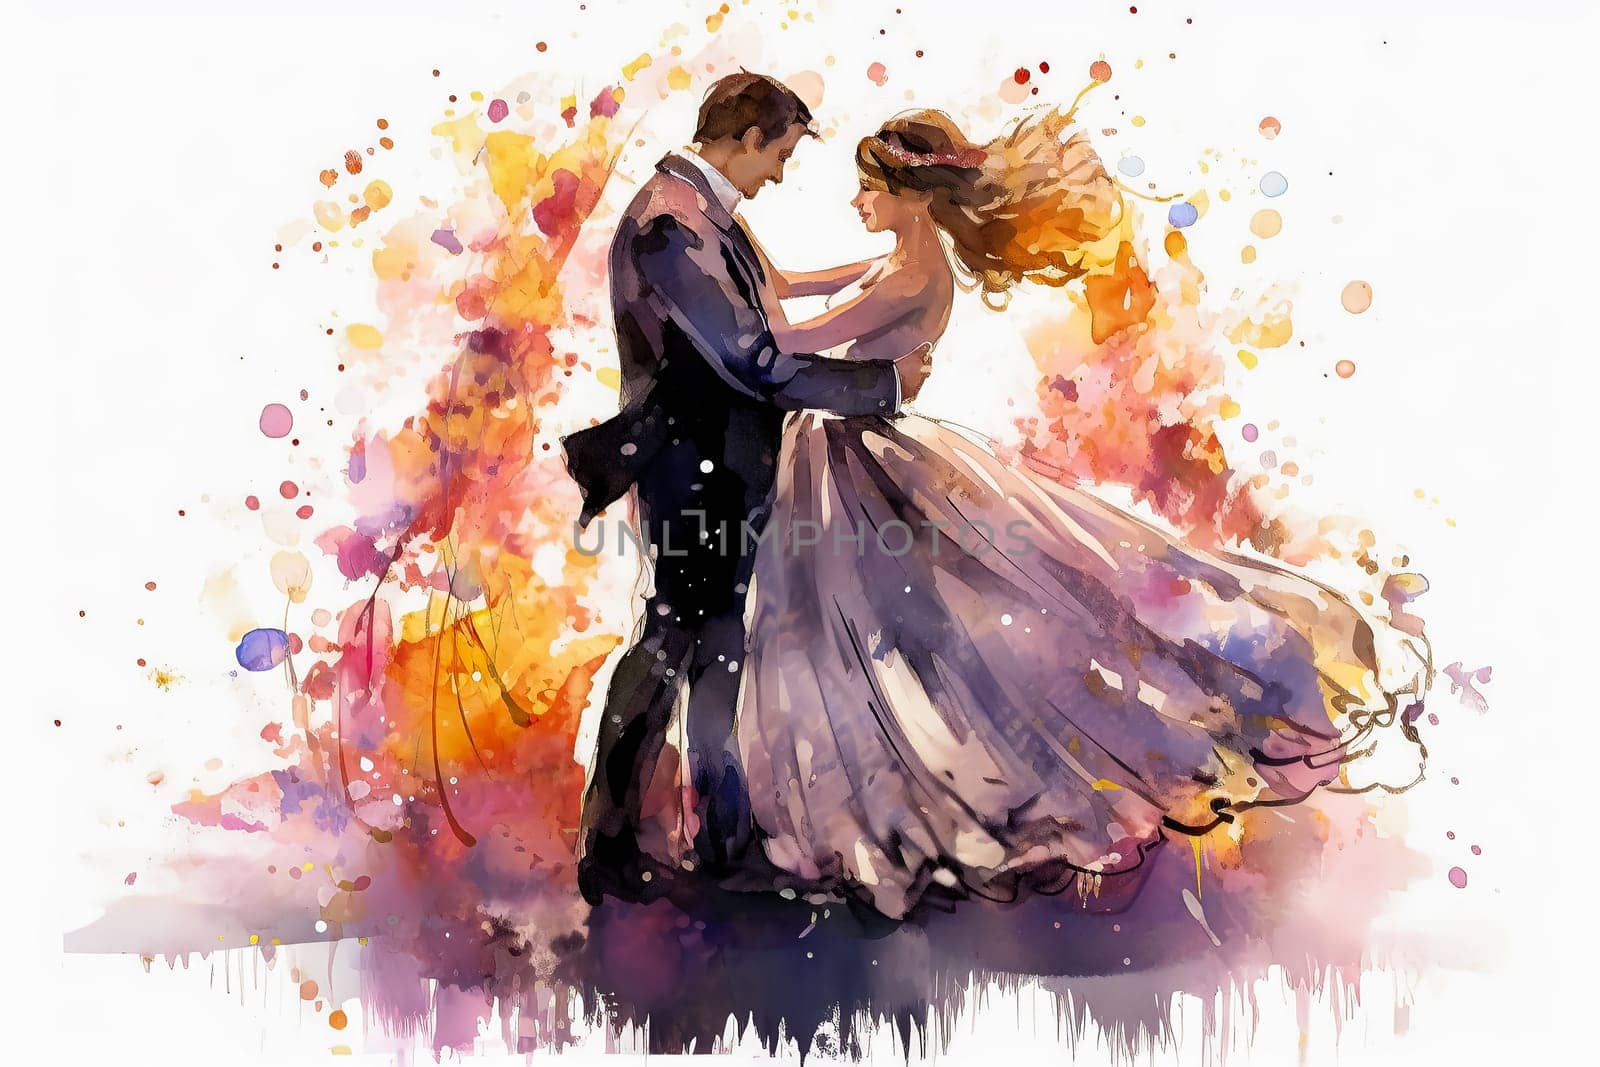 a watercolor illustration depicting a couple in love dancing against a vibrant backdrop. by Alla_Morozova93